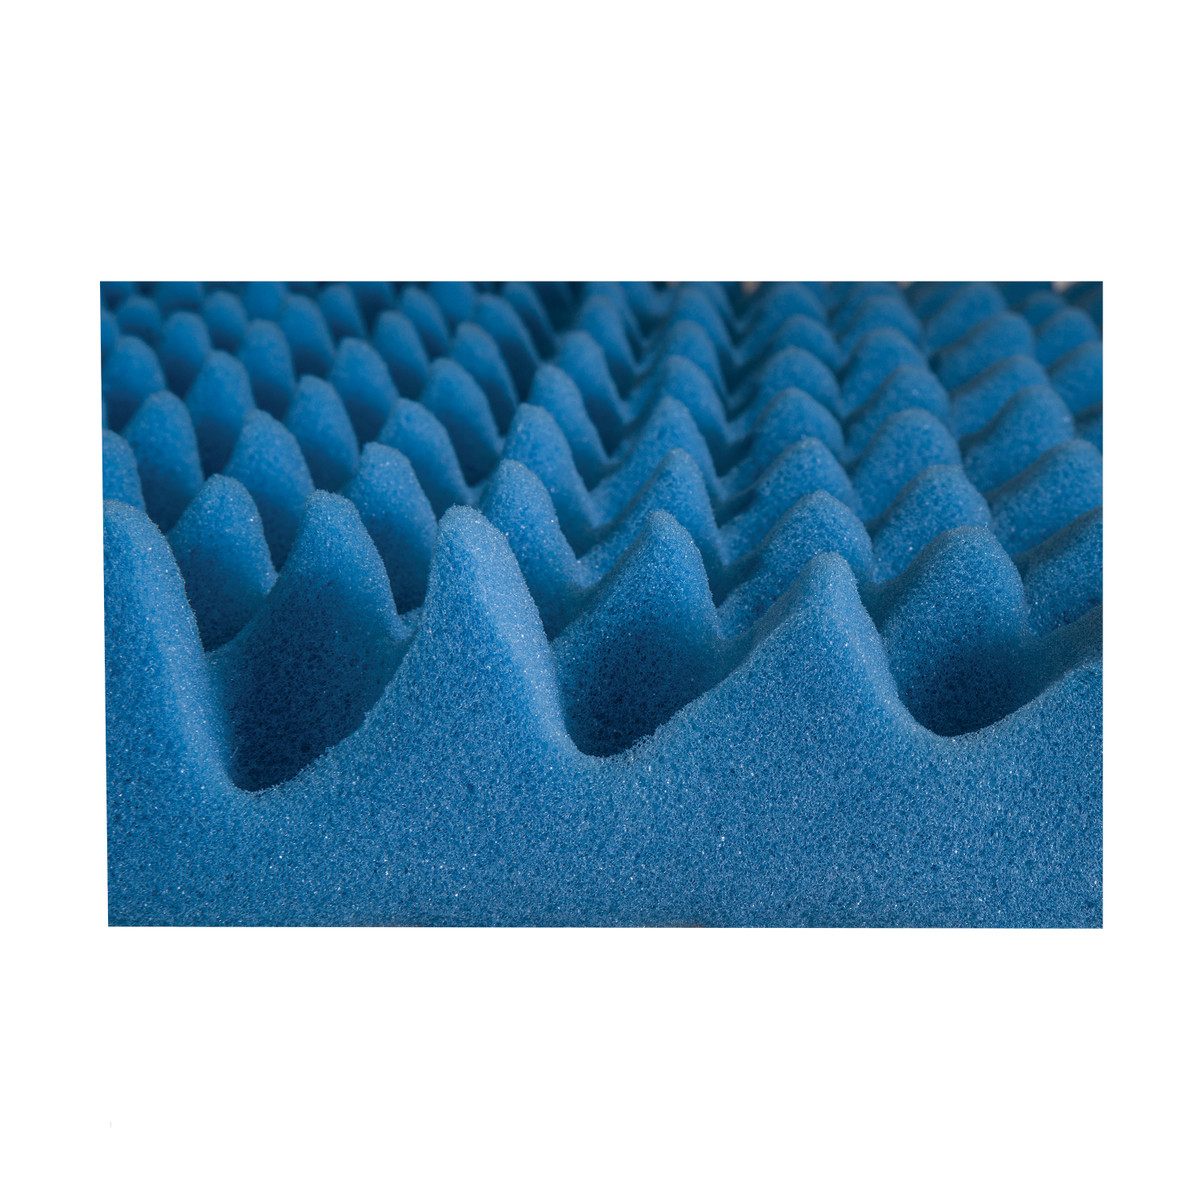 Convoluted Bed Pads helps prevent pressure sores